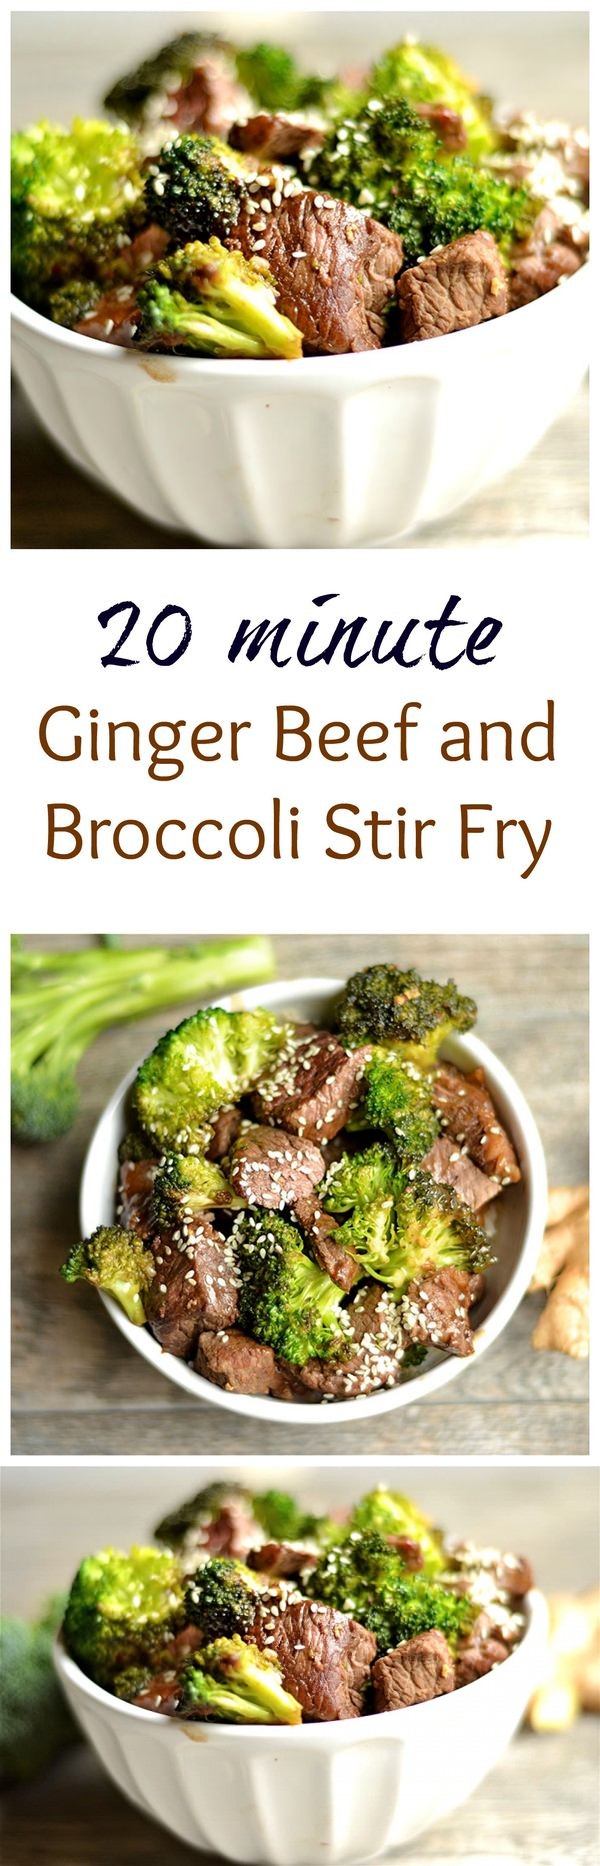 Ginger Beef and Broccoli Stir-Fry